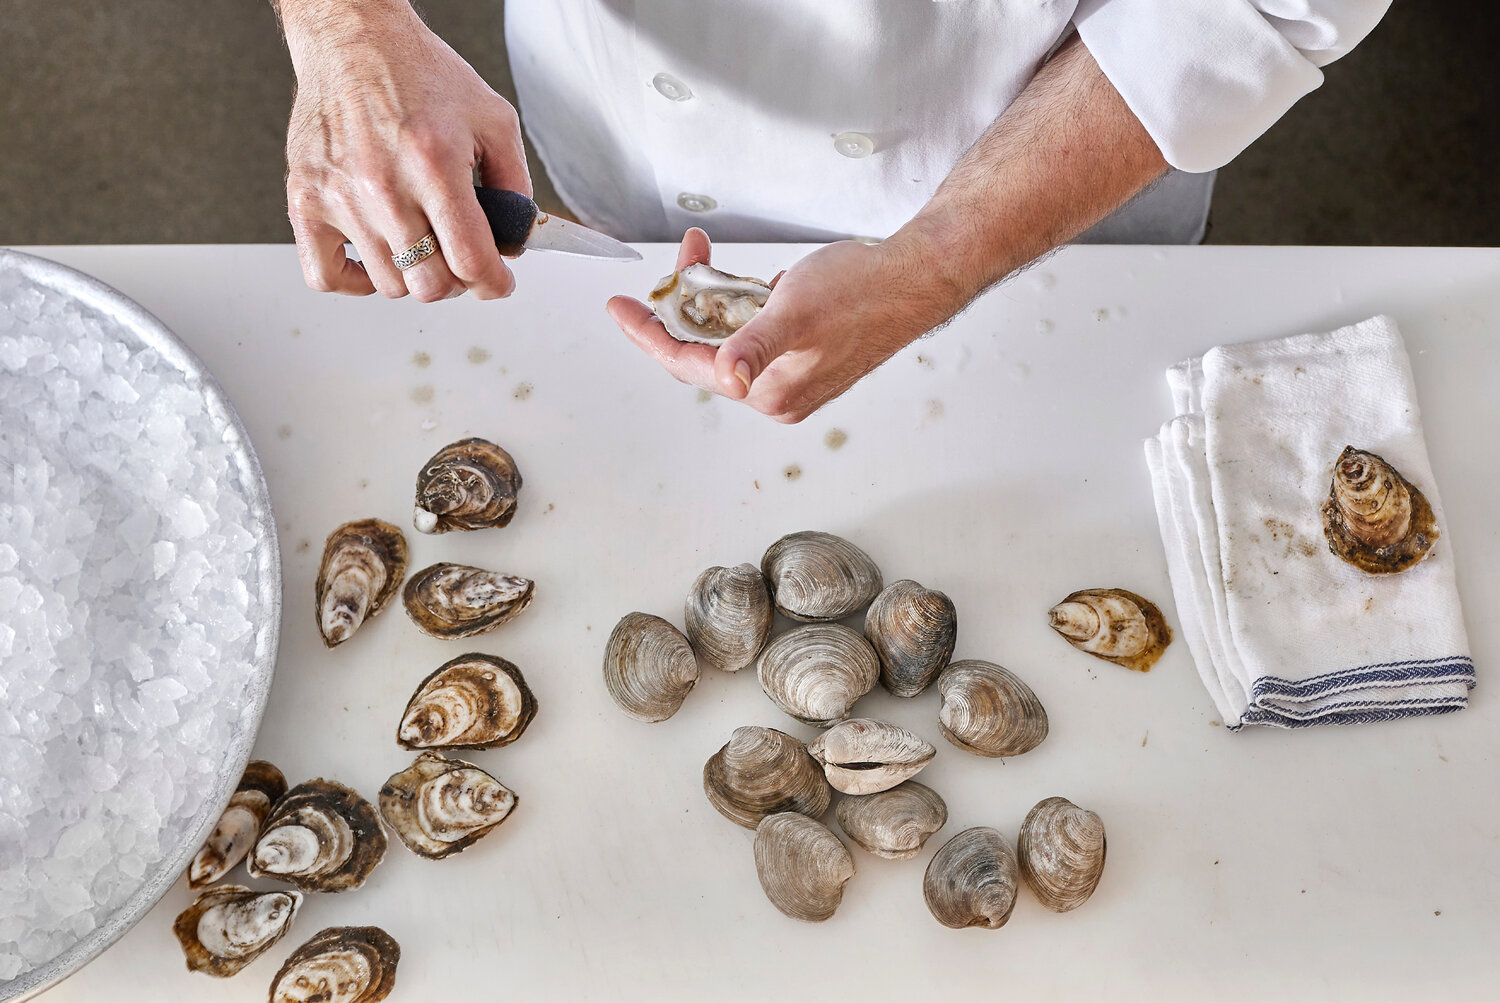 Graham demonstrates tools of the trade at Oyster Shucking 101